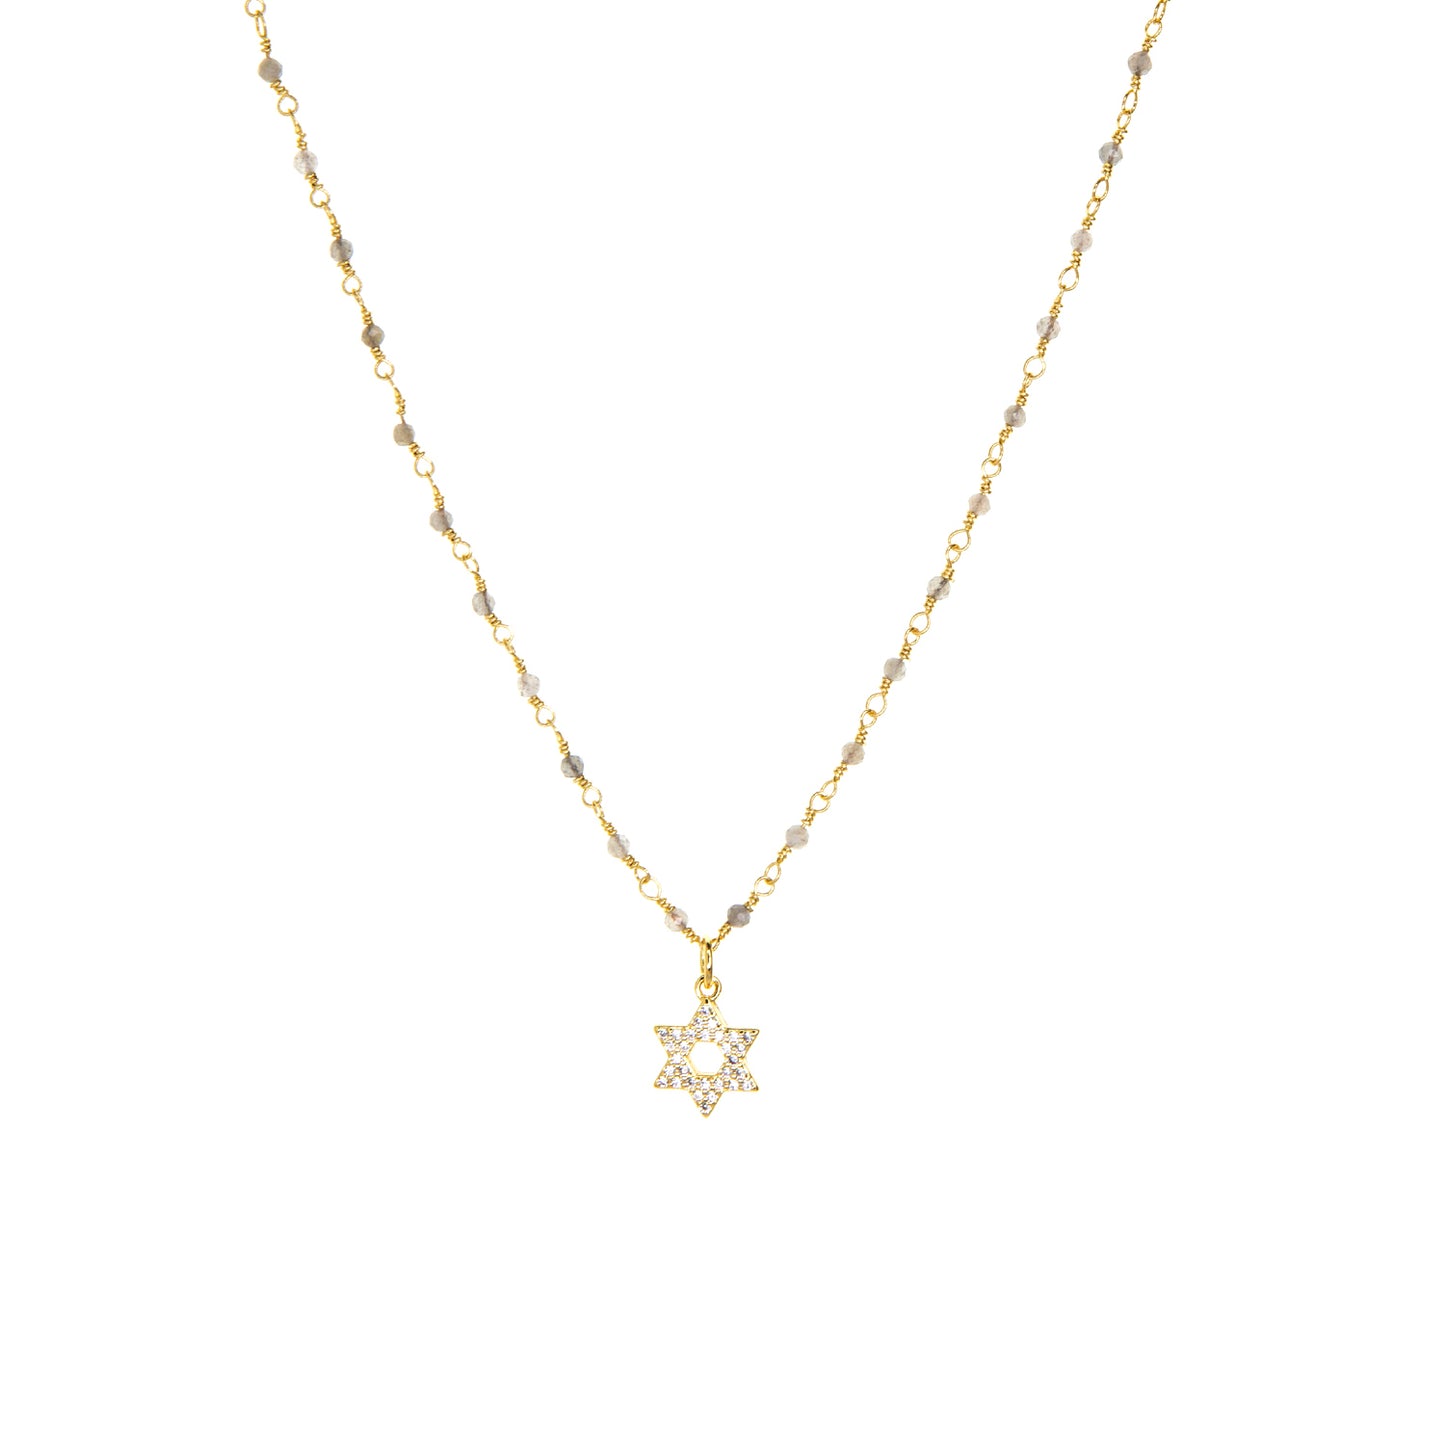 natural stone necklace with cz star of david charm